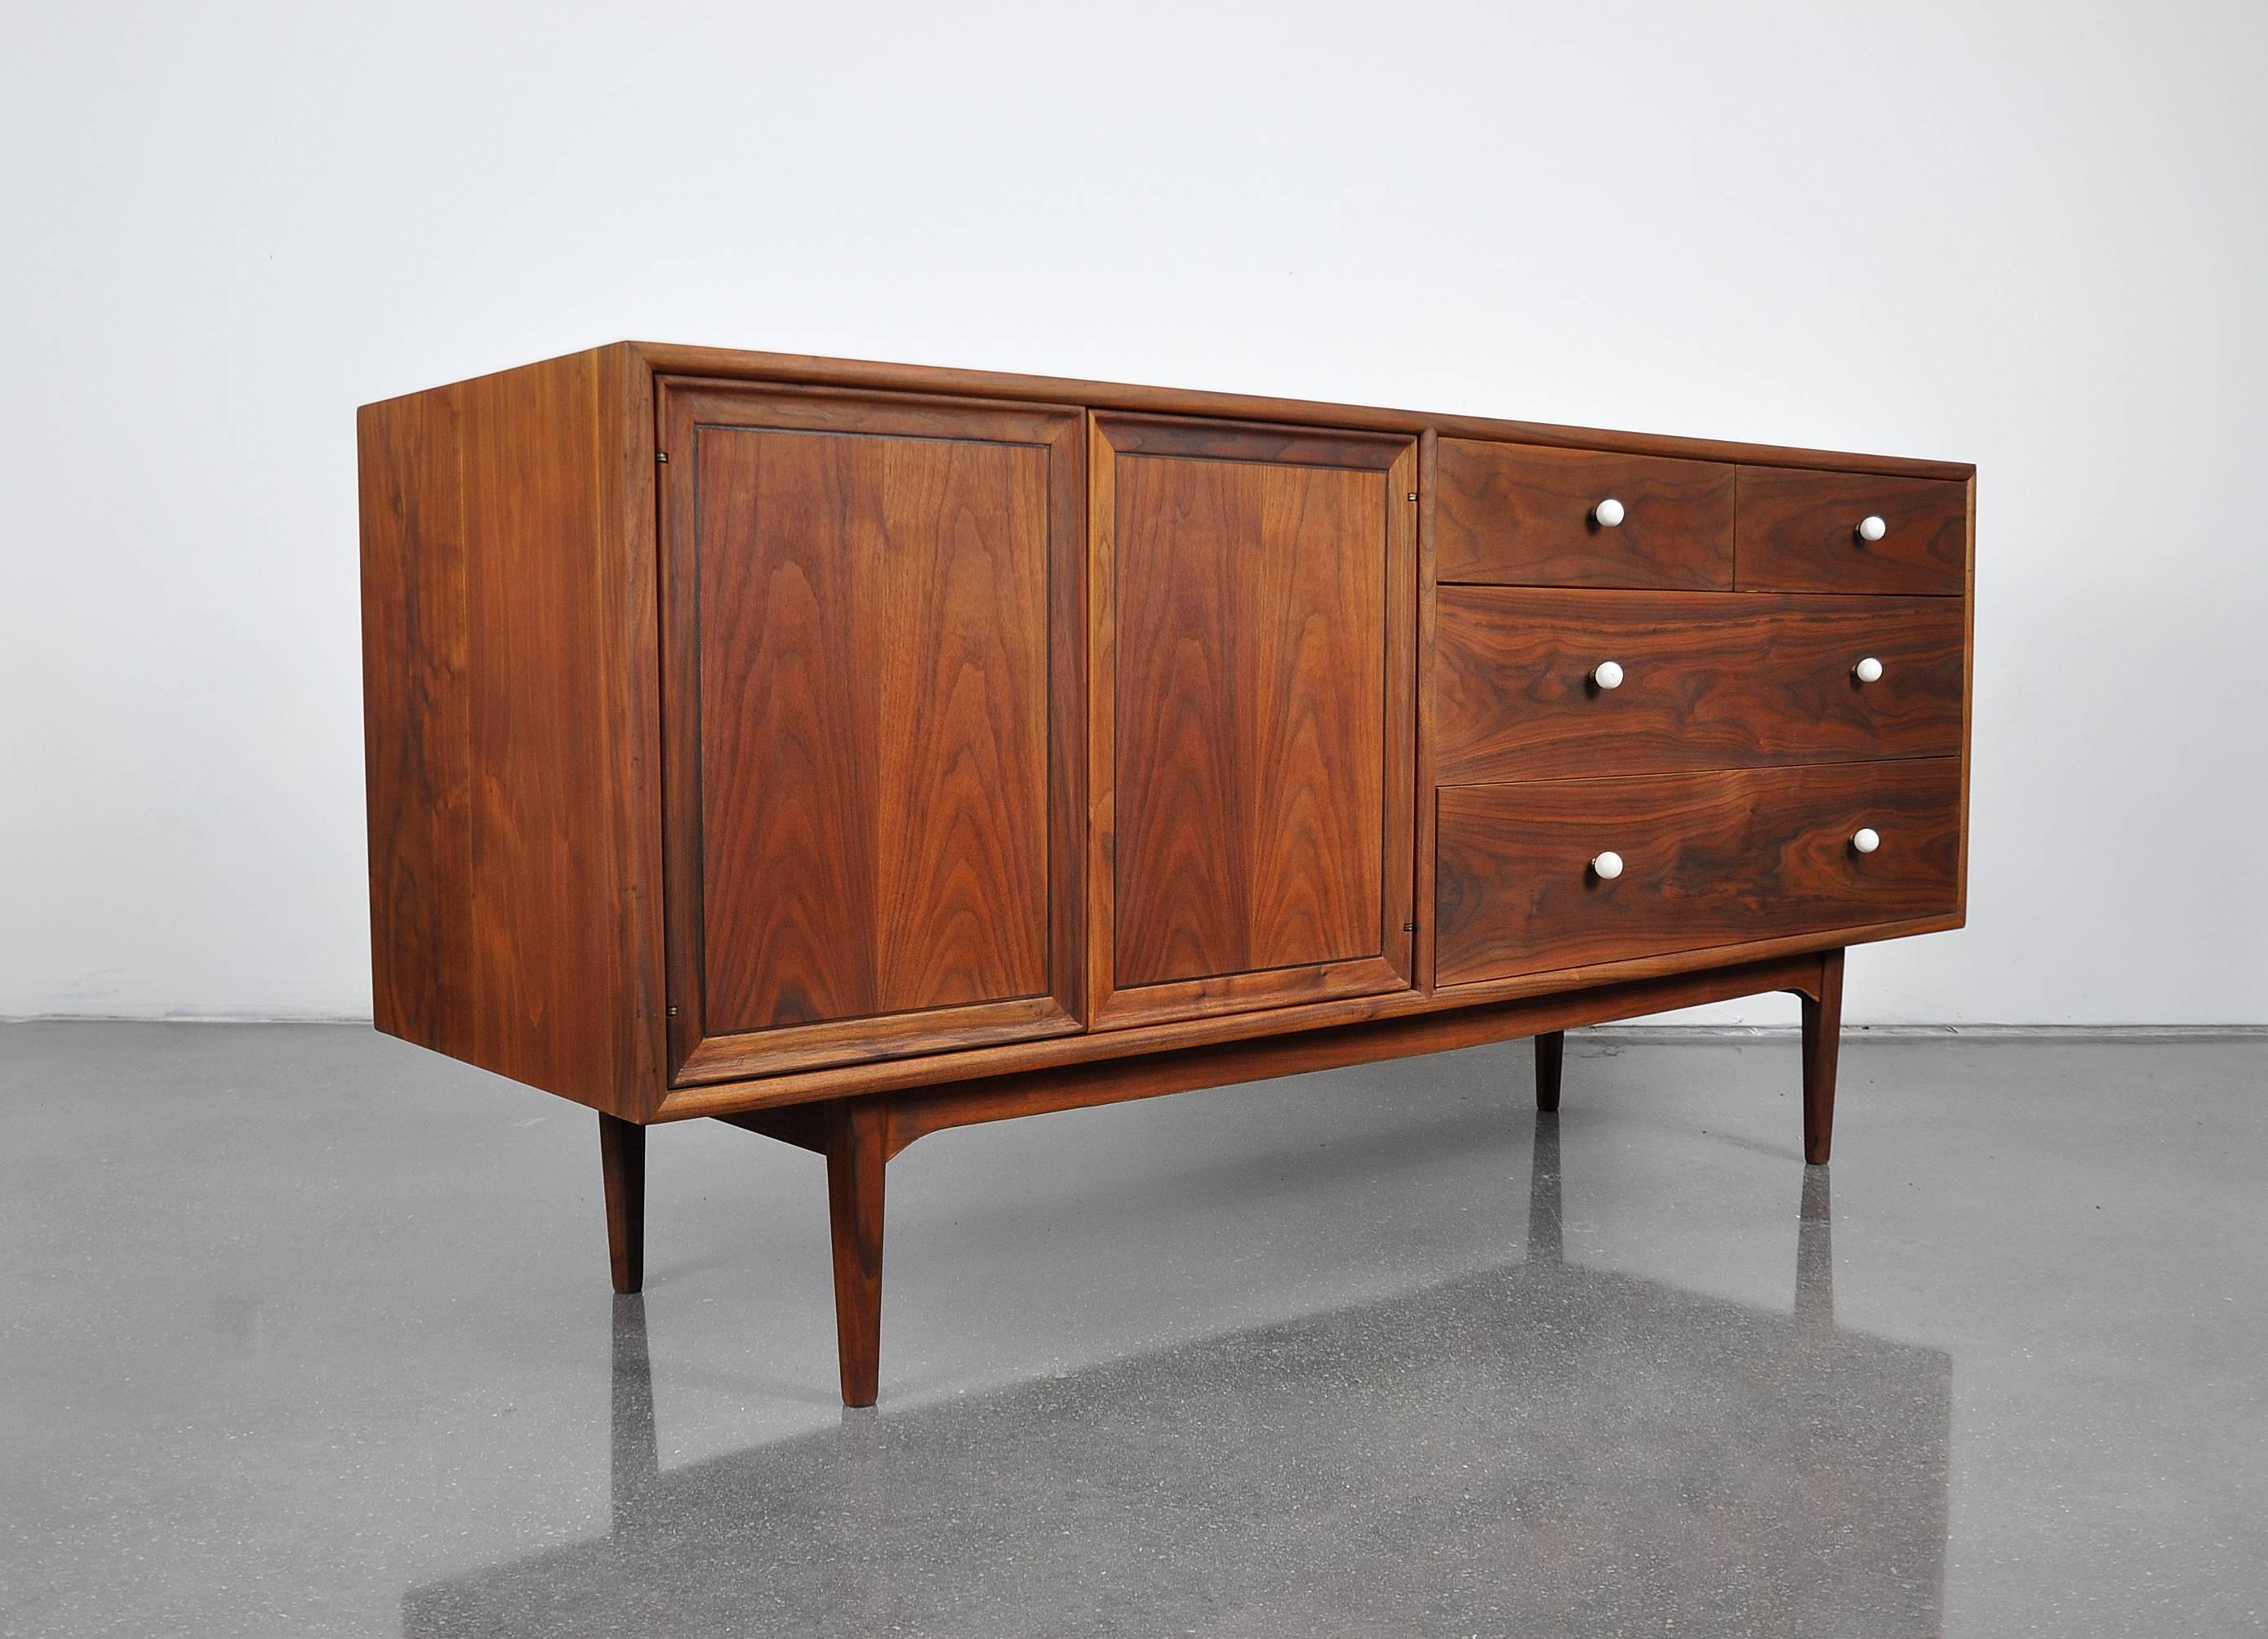 A gorgeous Mid-Century Modern walnut triple dresser from the desirable declaration line designed by Kipp Stewart and Stewart MacDougall for Drexel in the 1950s. The credenza features gorgeous wood grain patterns and the original signature white